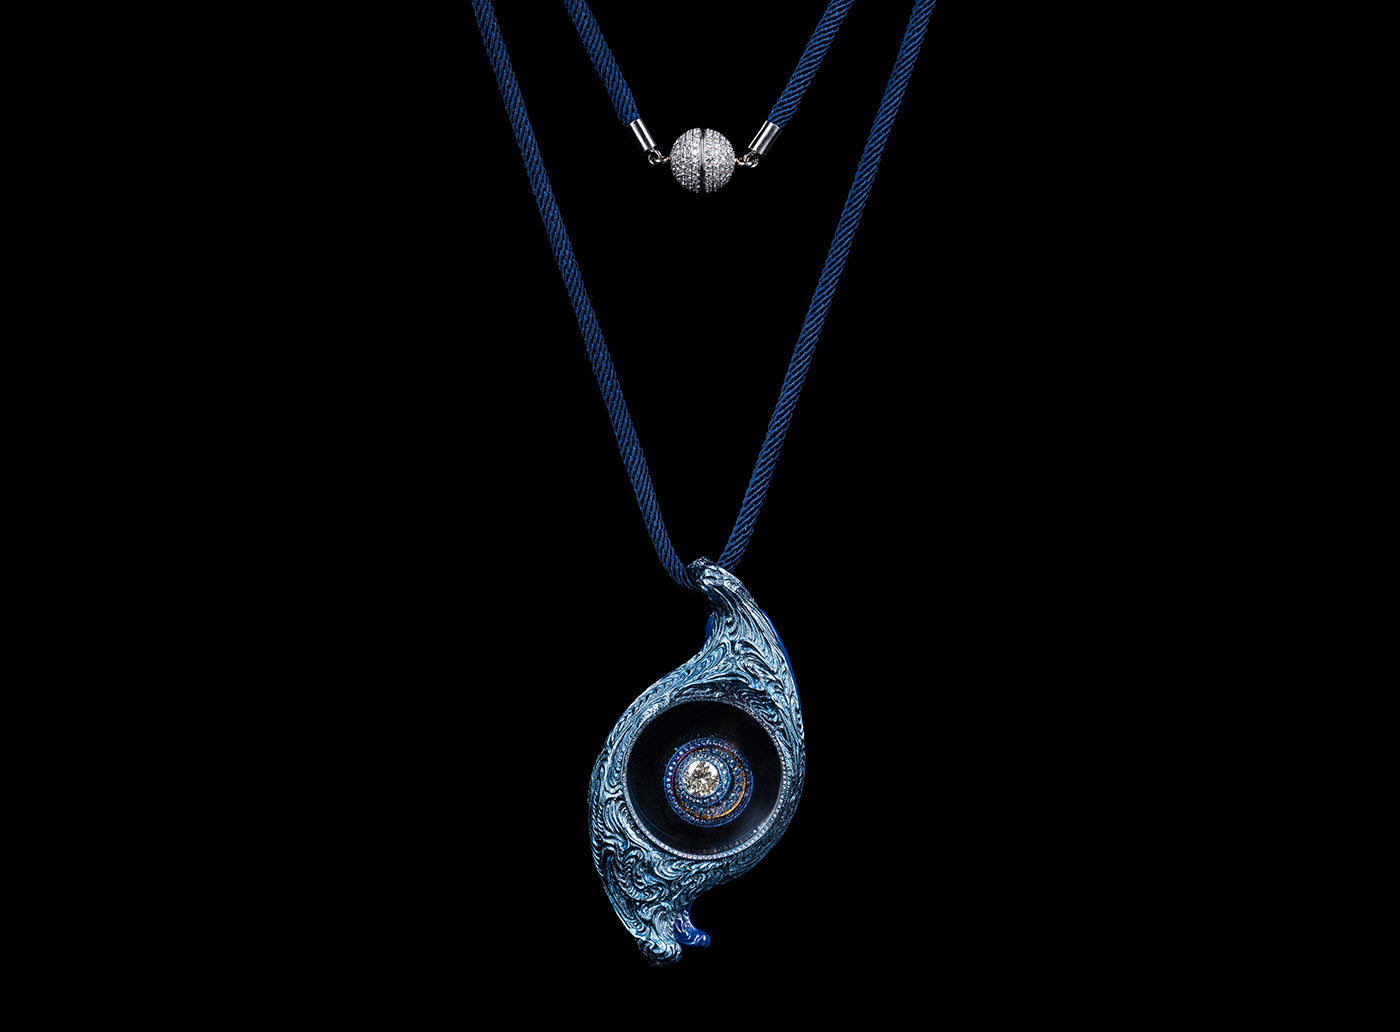 Wallace Chan ‘Eye of Time’ pendant with 1.06ct fancy yellow diamond, sapphire and diamond in 18K white gold, lens, titanium and Wallace Chan Porcelain